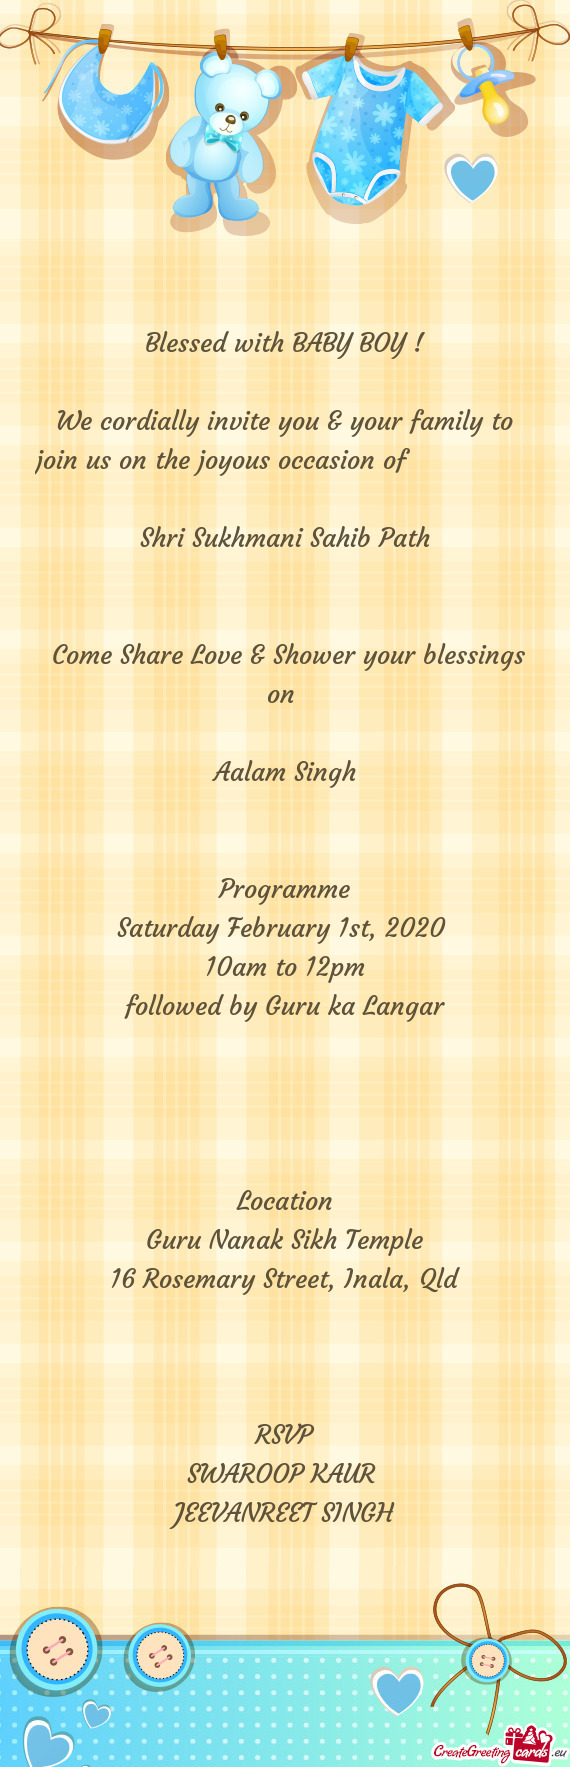 Come Share Love & Shower your blessings on